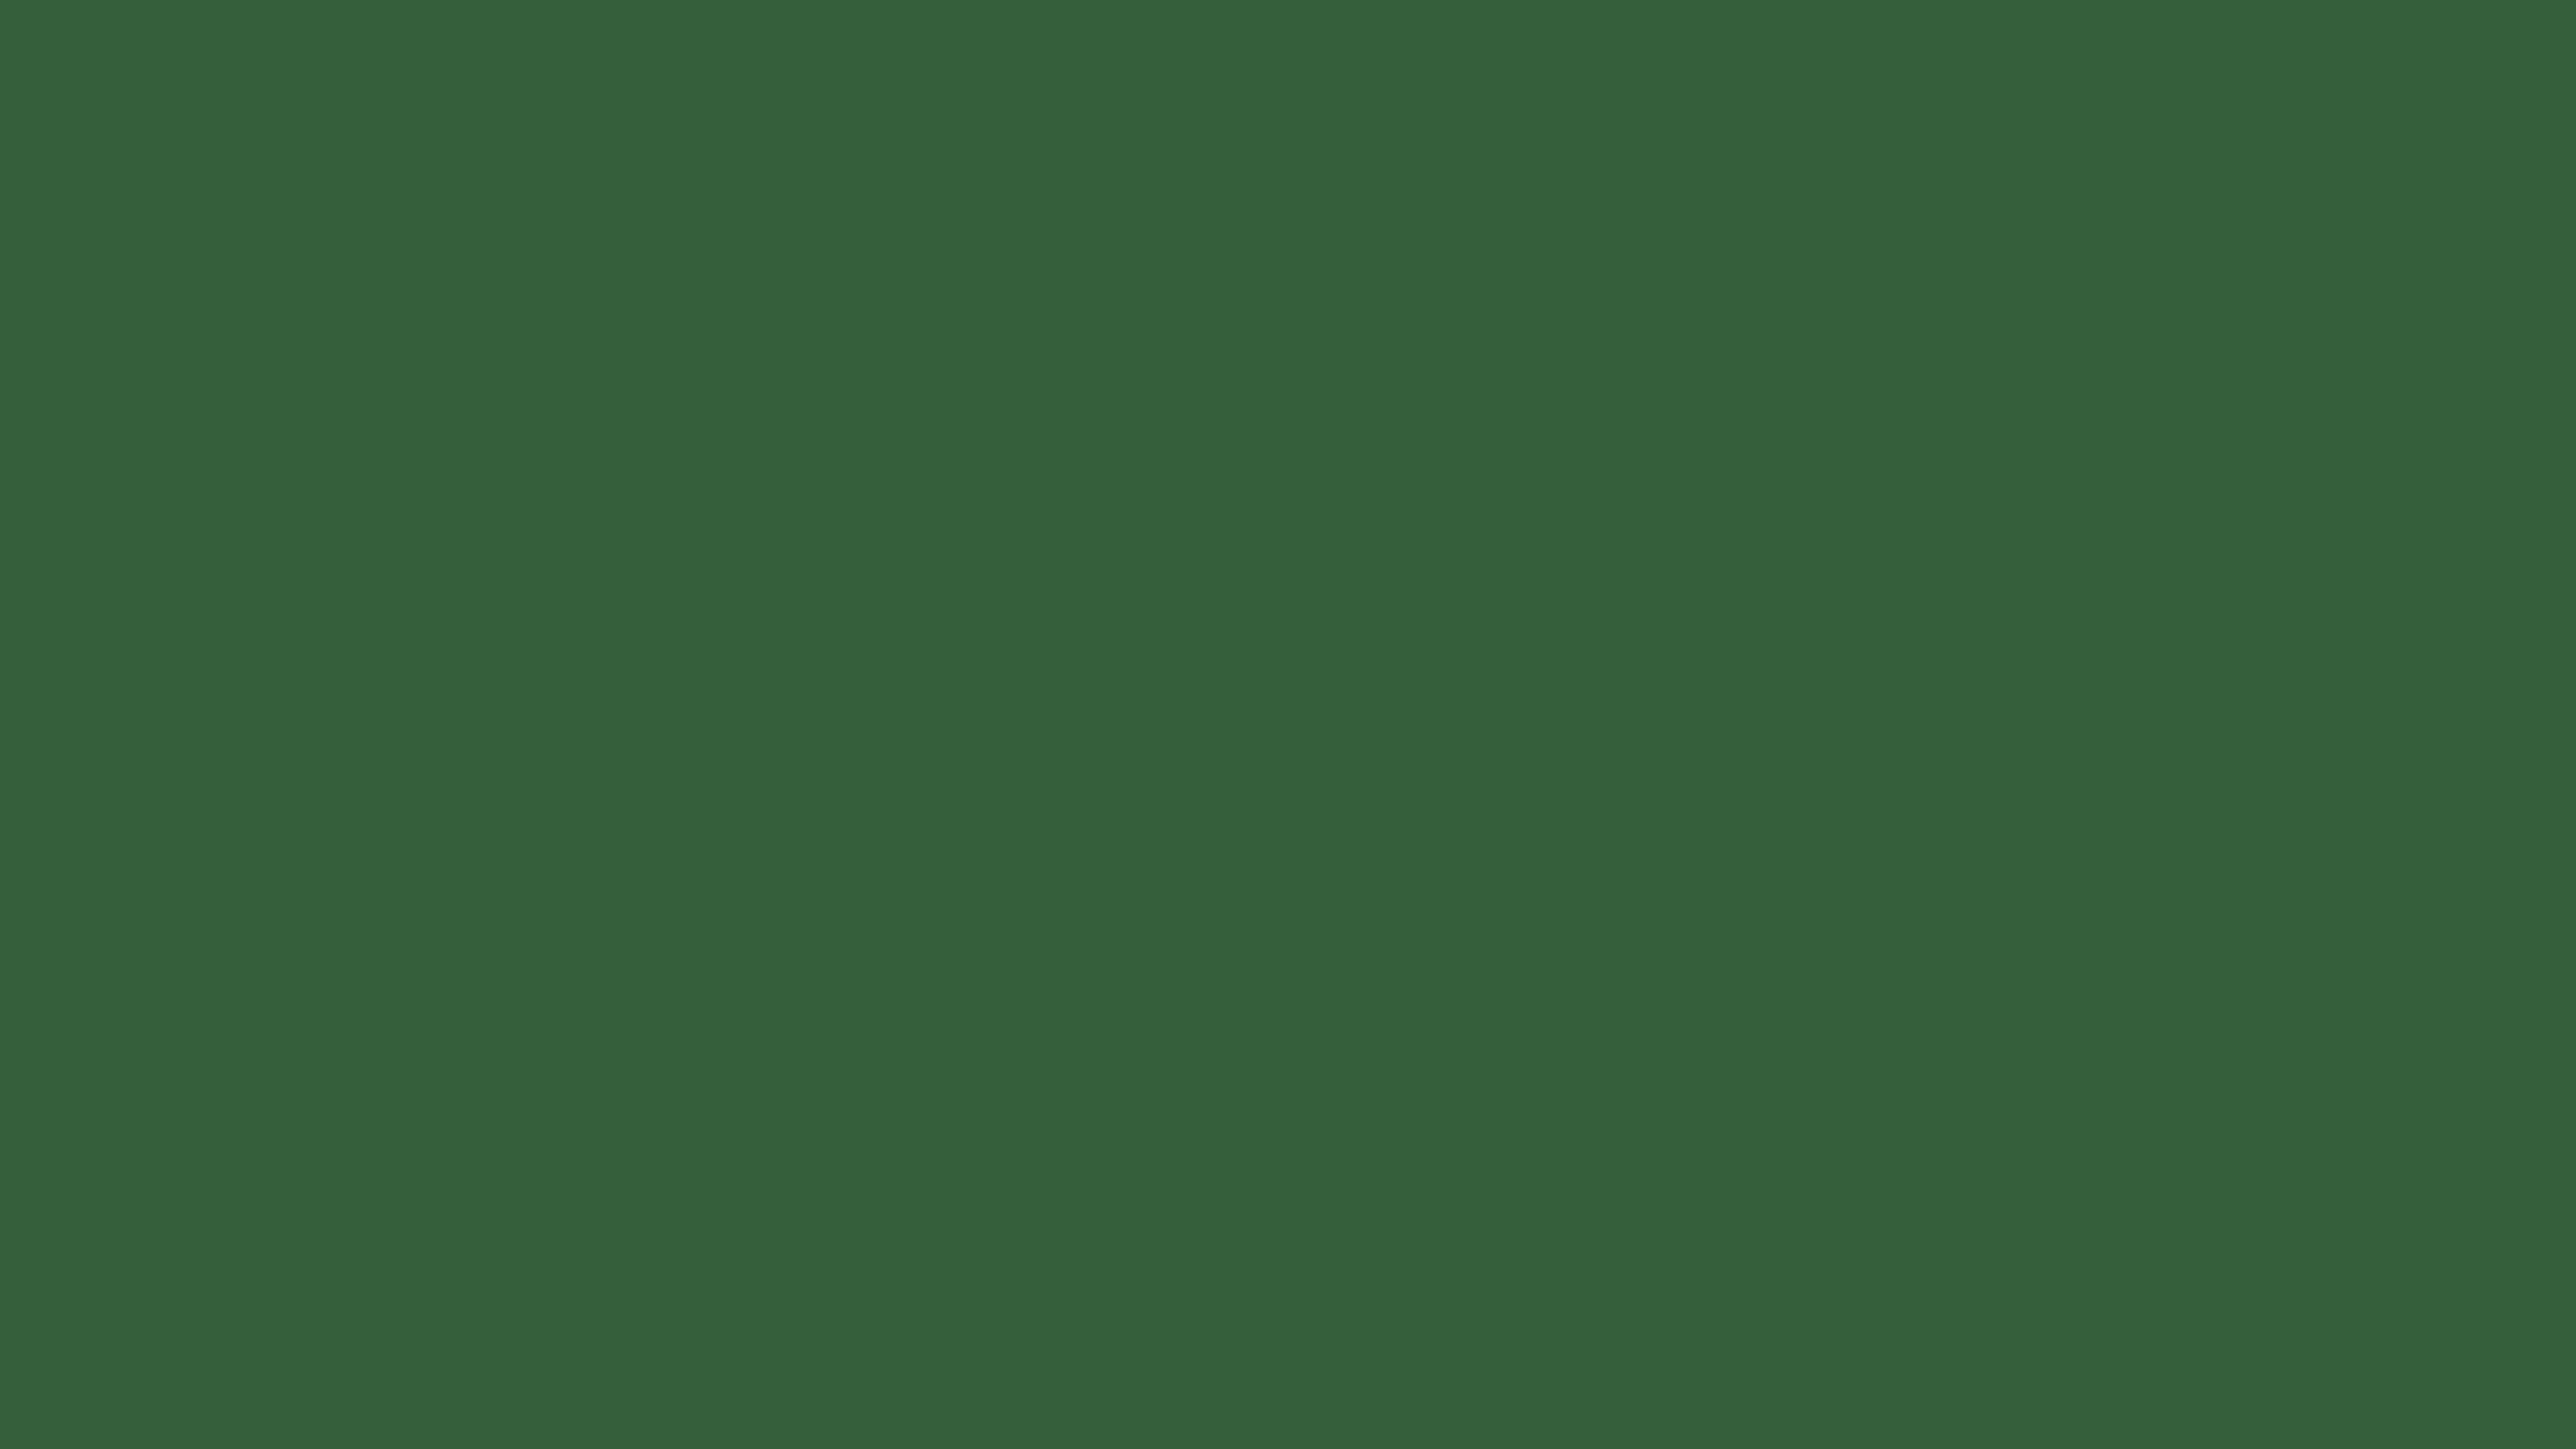 7680x4320 Hunter Green Solid Color Background